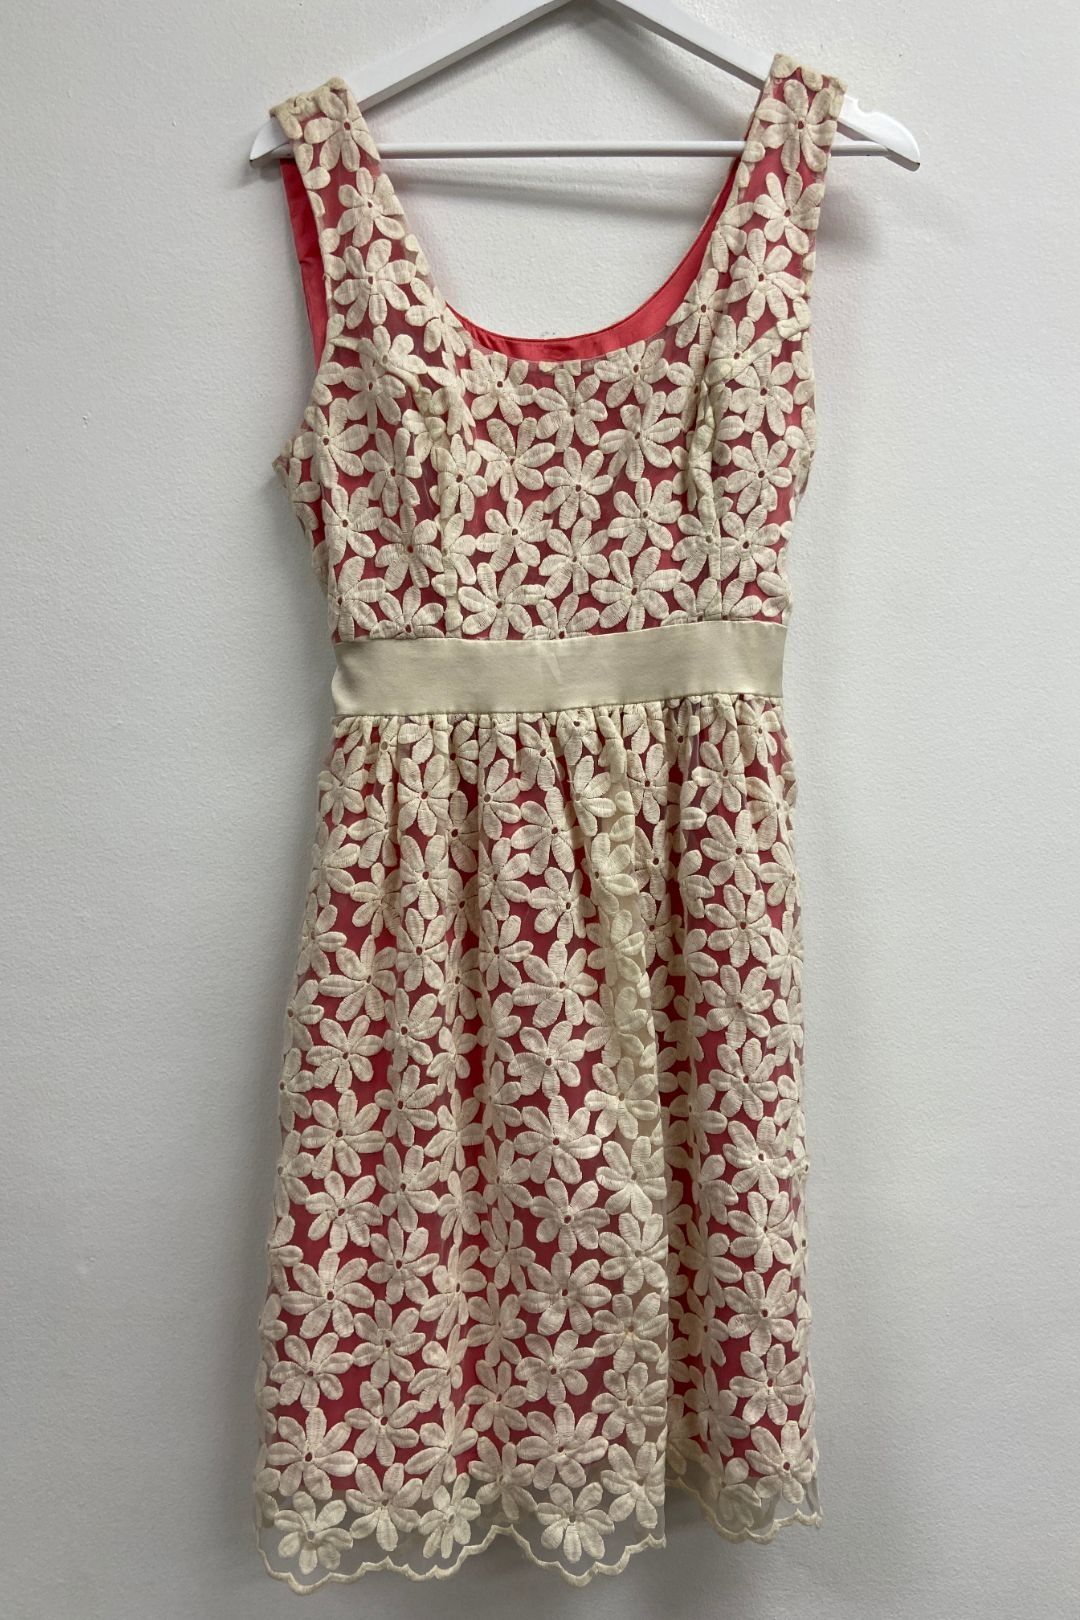 Coral and White Floral Embroidered Dress